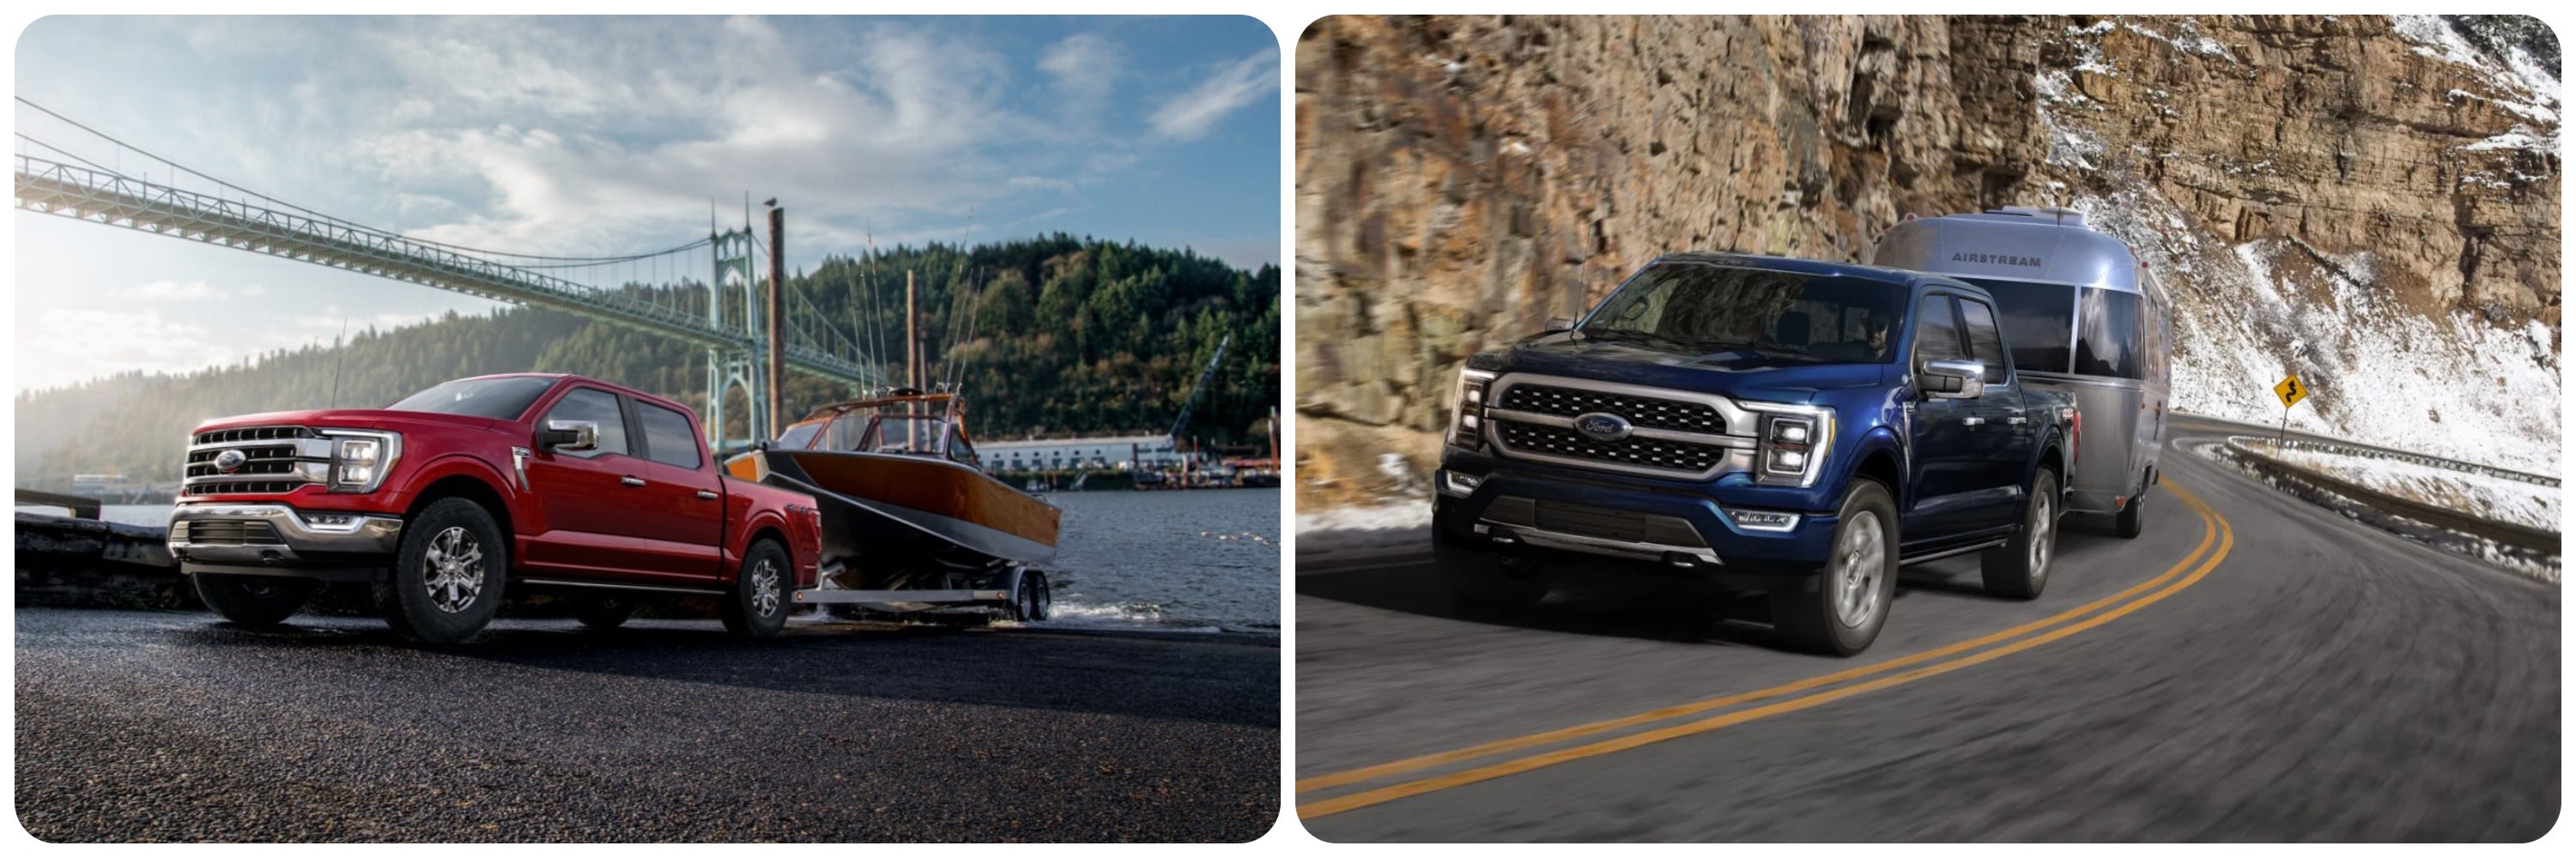 On the left a cherry red 2022 Ford F150 sits parked on a beach with a small speedboat it towed moved into the water. On the right a blue 2021 Ford F150 hauling an airstream trailer on a curving mountain road